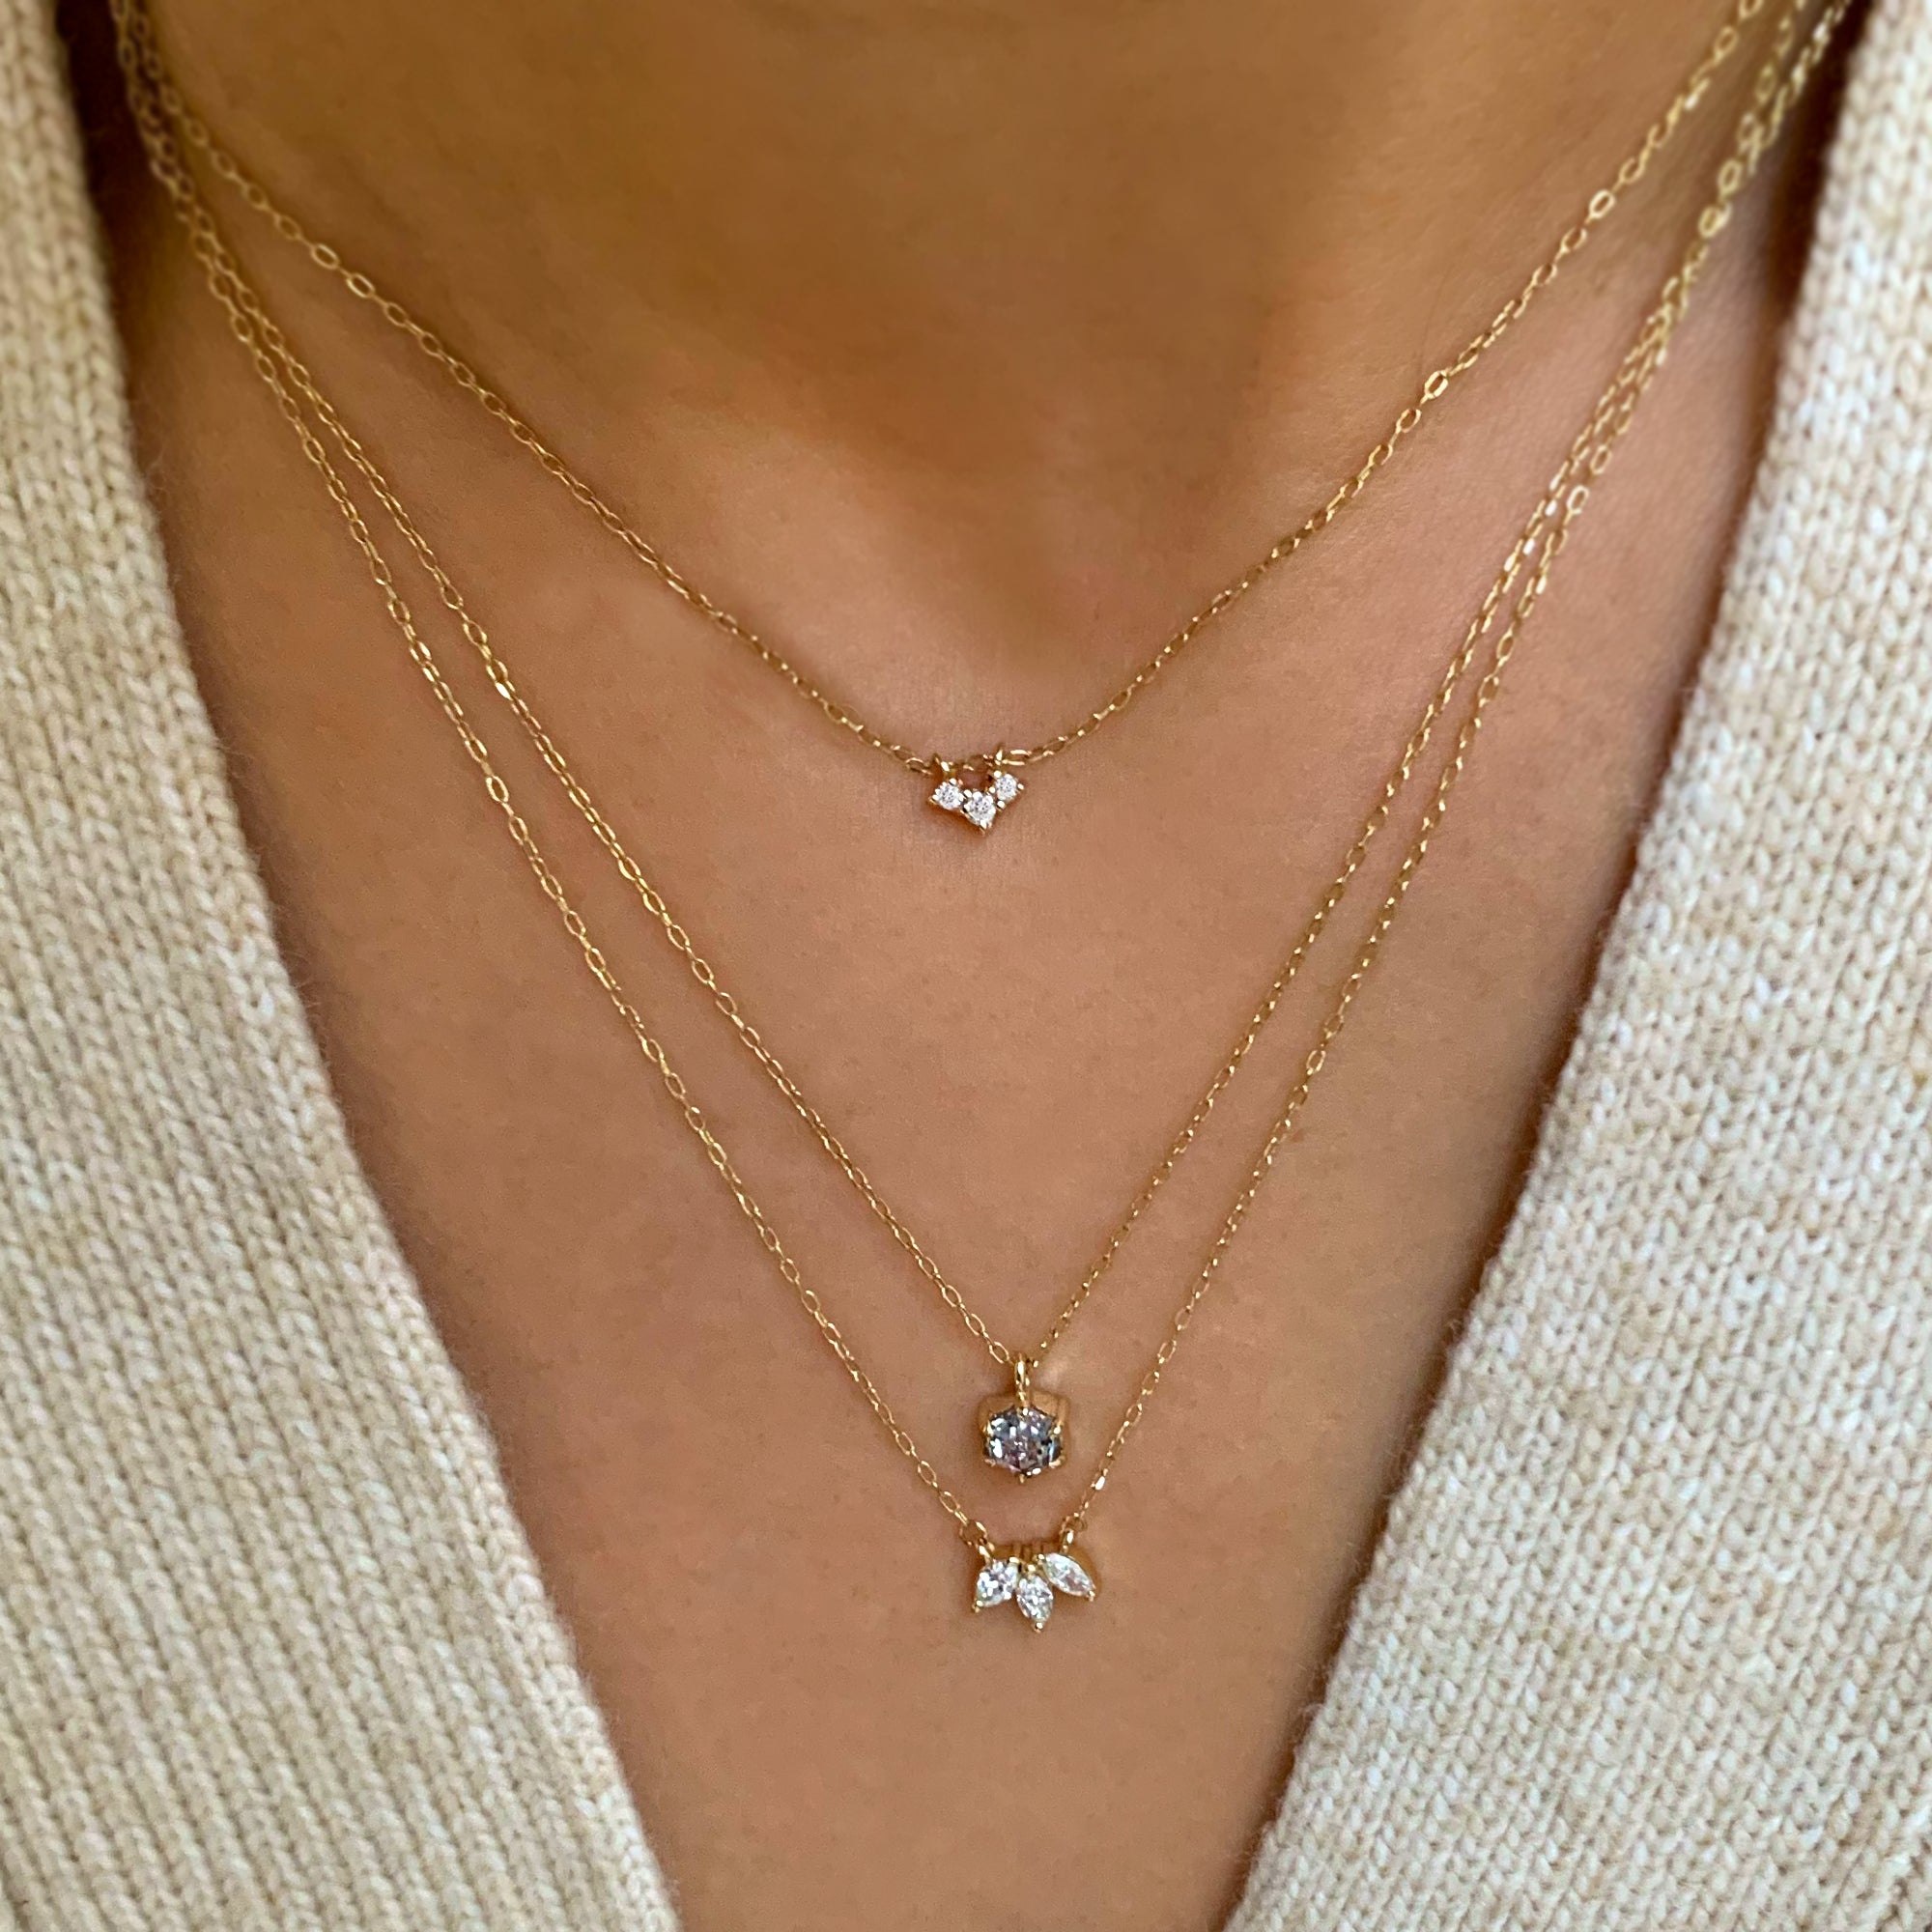 Jamie Park Jewelry - Three Diamond Necklace Upgrade everyday looks with this classic dainty diamond necklace. Perfect for day or night, this piece is perfect for wearing on special occasions or adding a touch of sparkles&nbsp;to your everyday look.